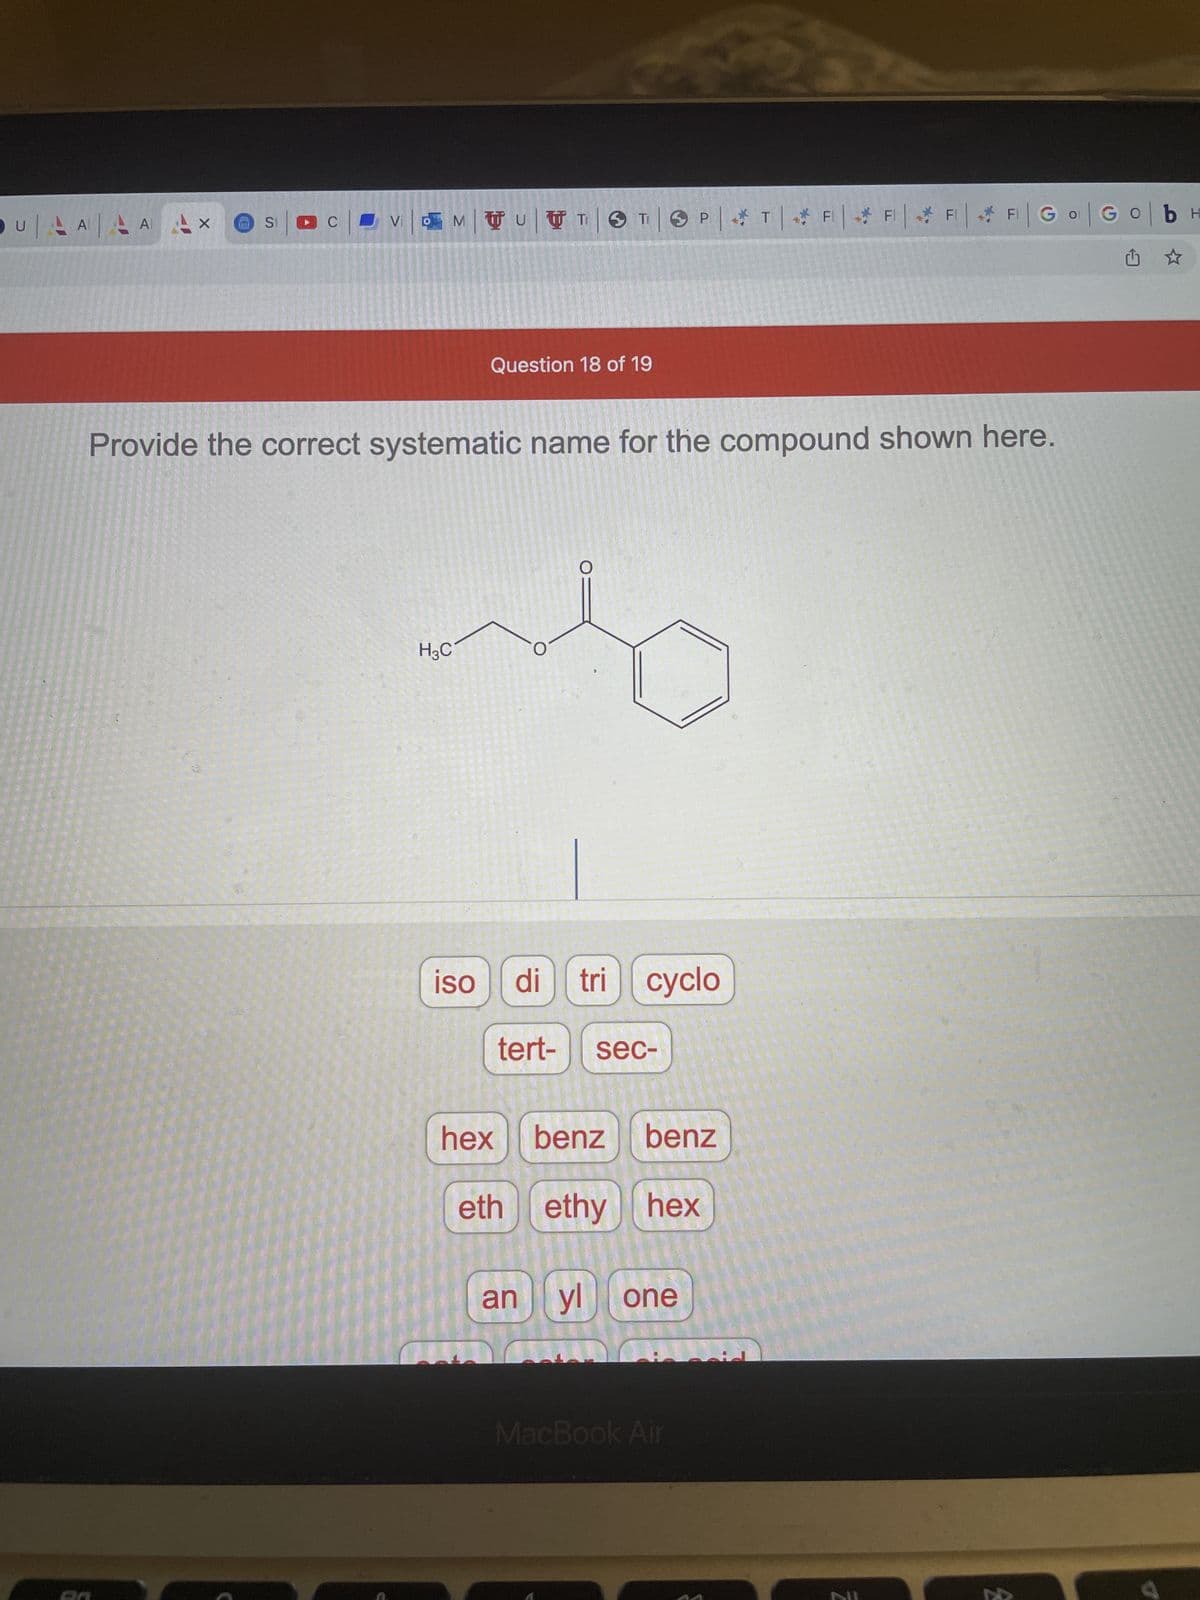 U
AAAAAX
S1
▶C
Р
Vi | MTUTTO TOPTFFFFGo Gob H
Question 18 of 19
Provide the correct systematic name for the compound shown here.
O
H3C
iso
O
di tri cyclo
tert- sec-
hex
benz benz
eth ethy hex
an
yl one
MacBook Air
200
2